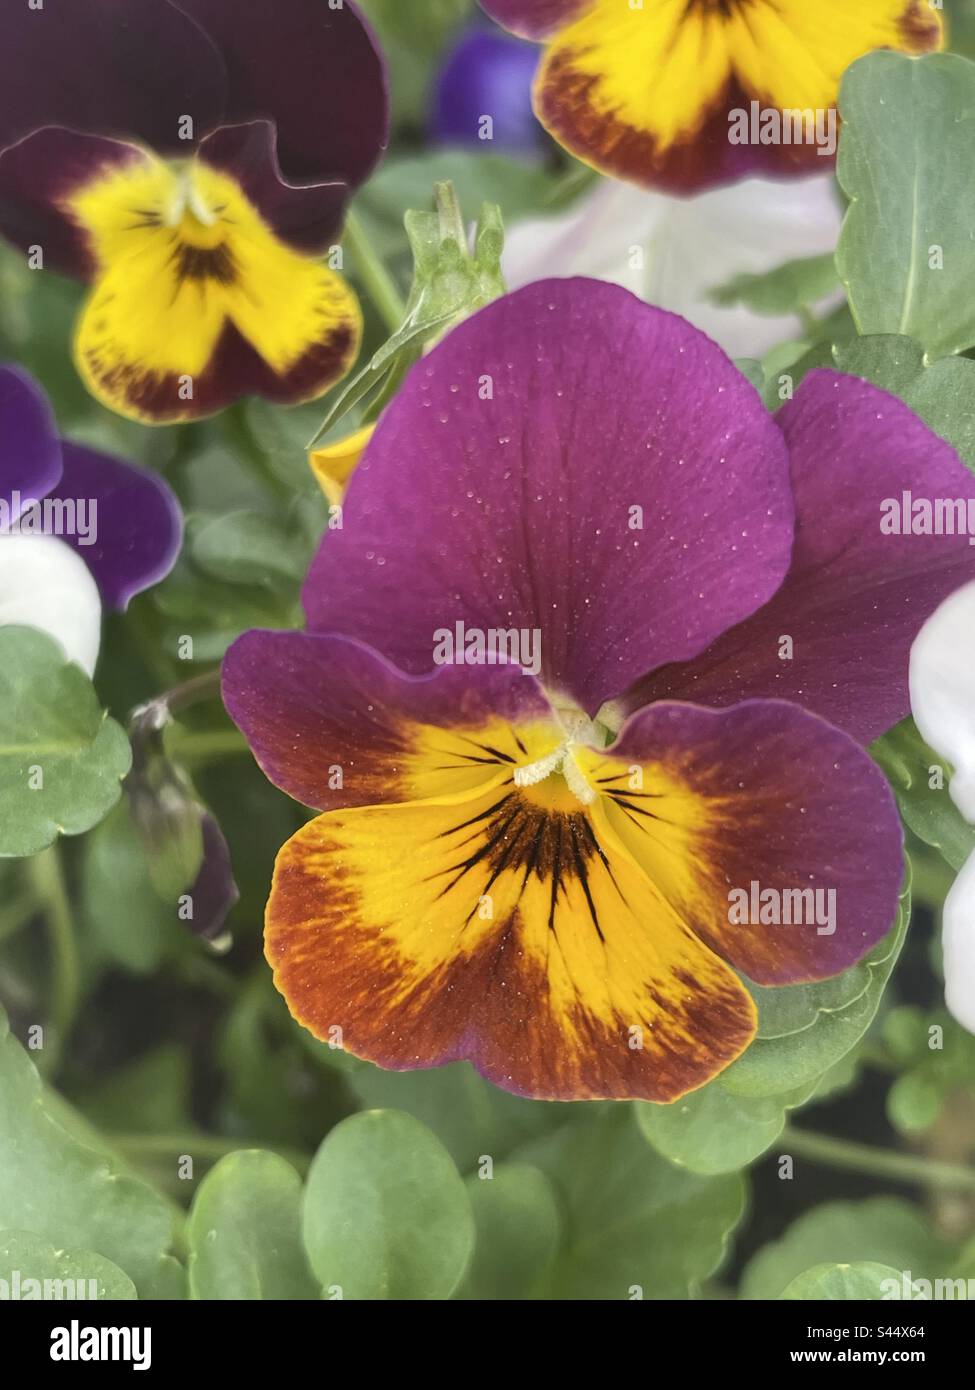 A place for gorgeous purple and yellow pansies in my garden Stock Photo